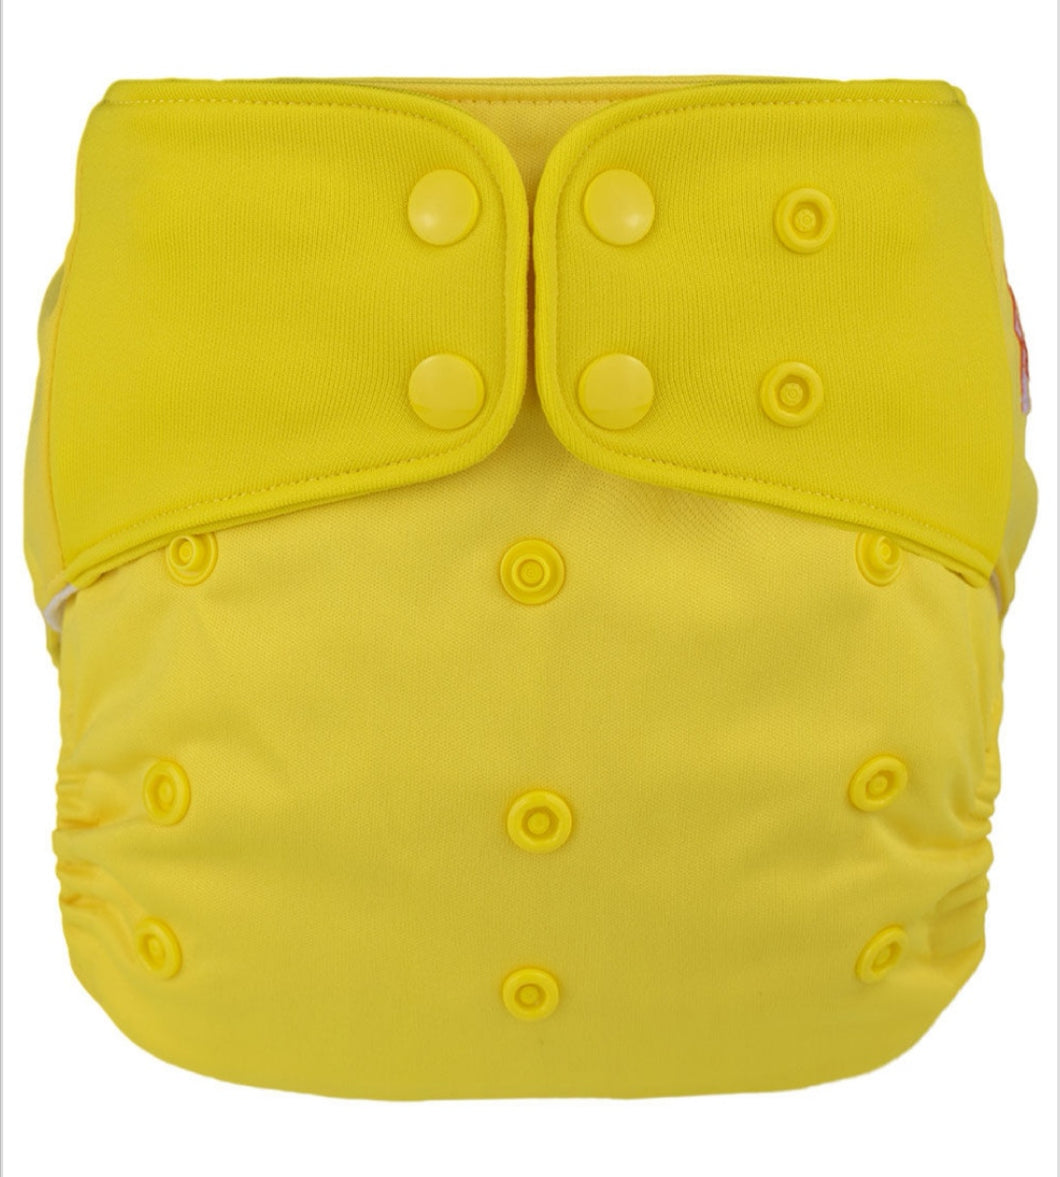 Lichtbaby pocket, Yellow. Includes 1 bamboo terry insert